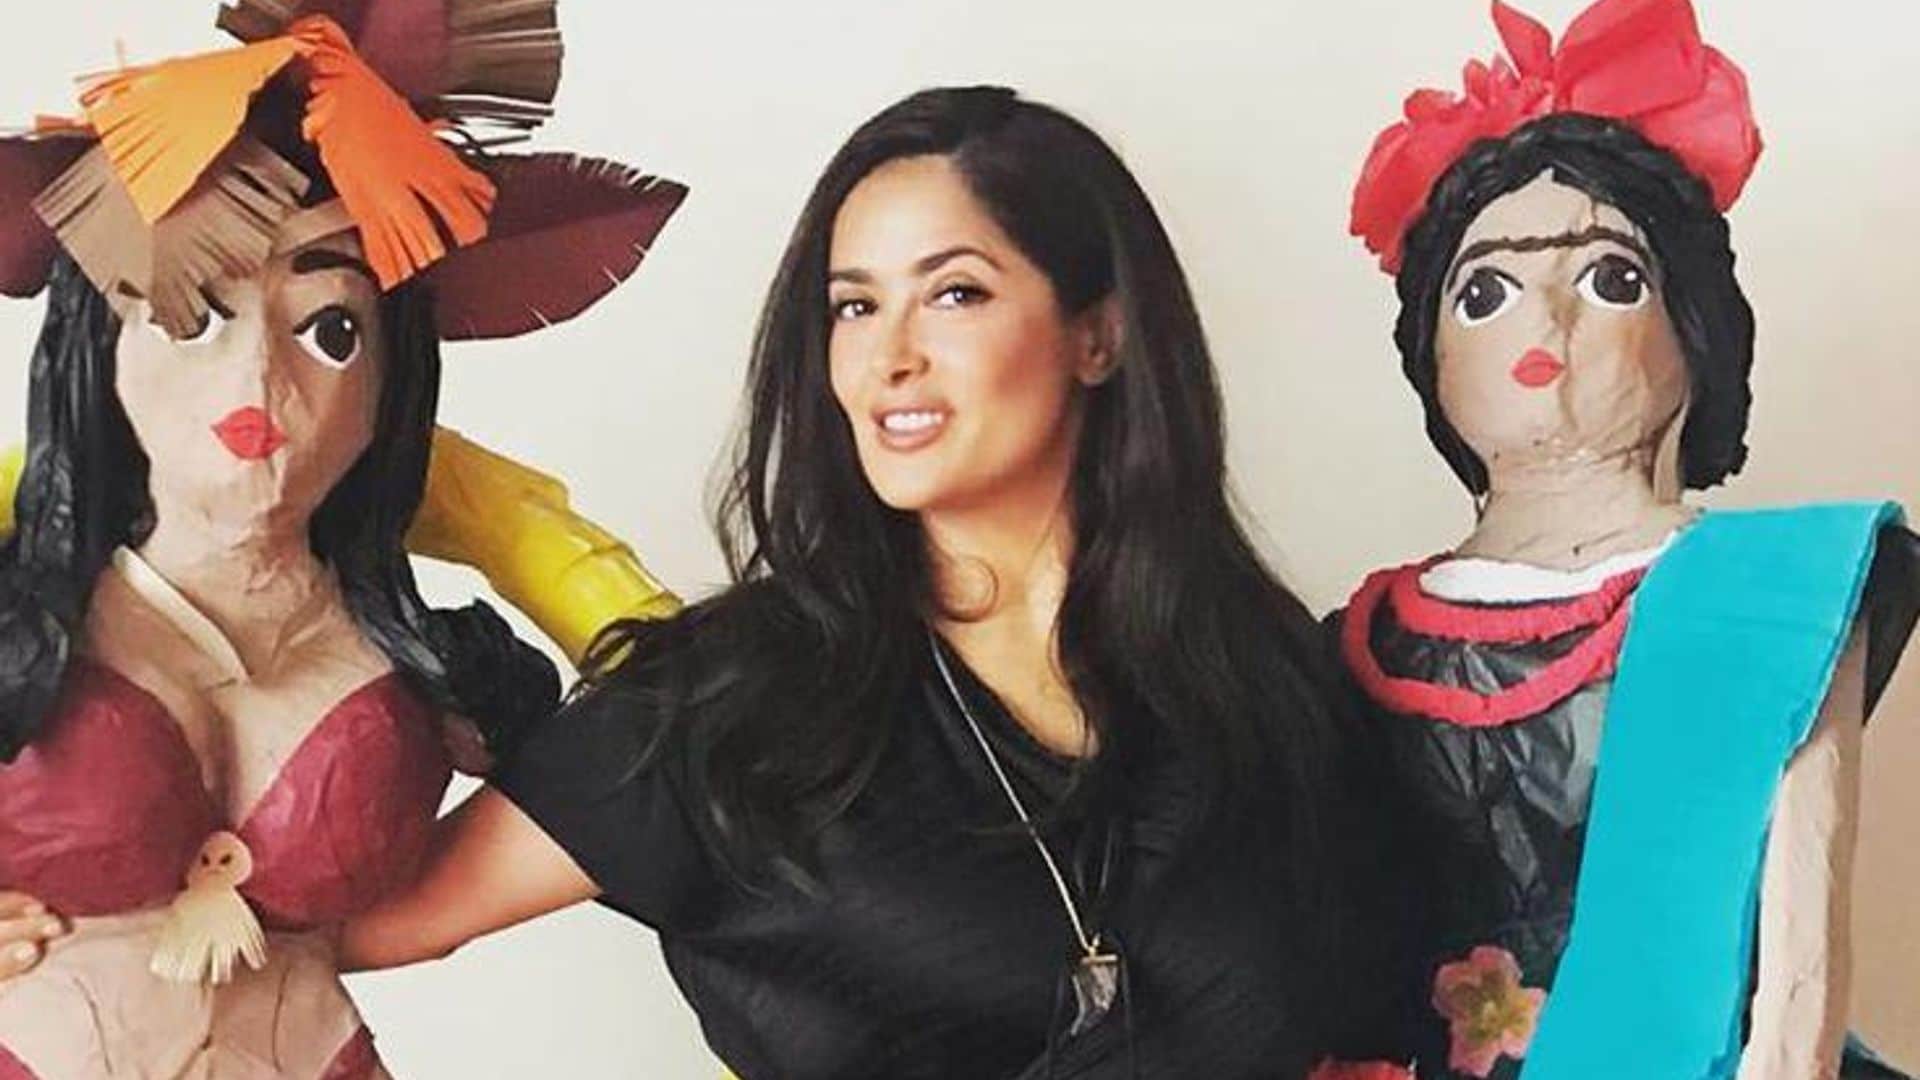 Salma Hayek had two big reasons to celebrate Mexico's Independence Day